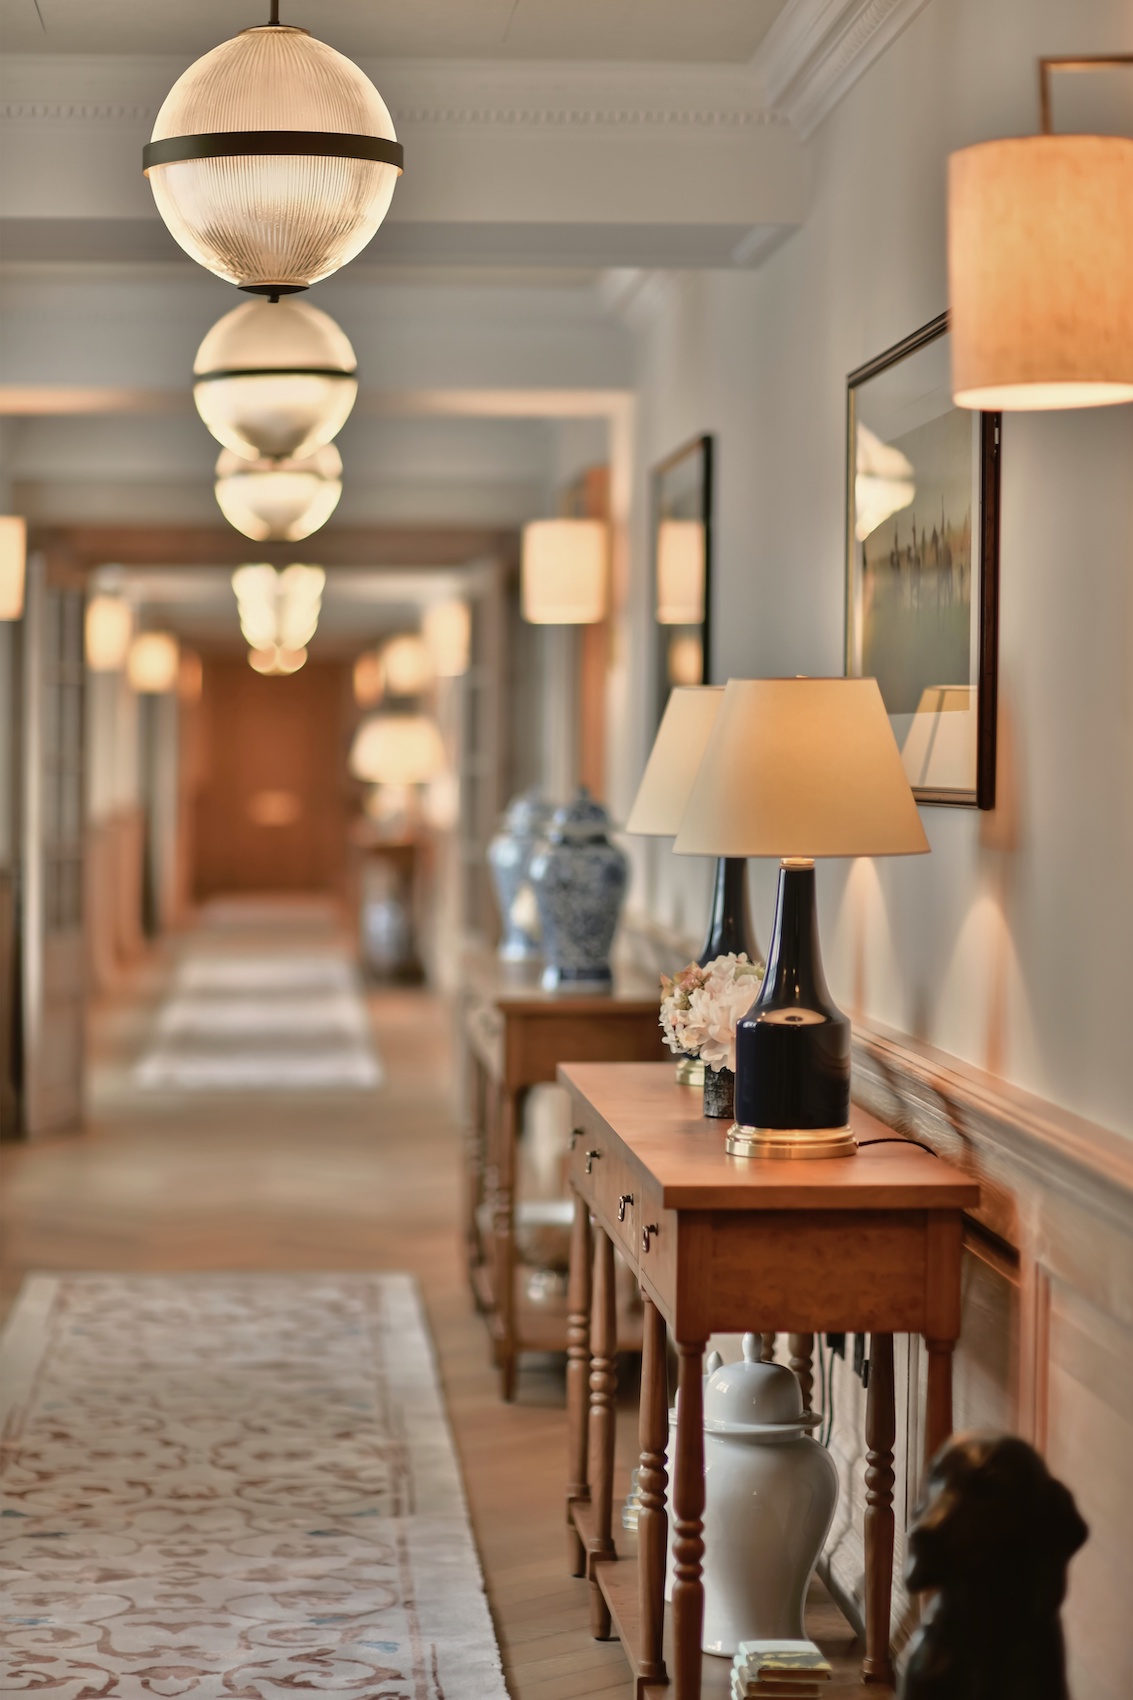 Processional hallway at The Astor at 9 Millbank with interior design by Goddard Littlefair